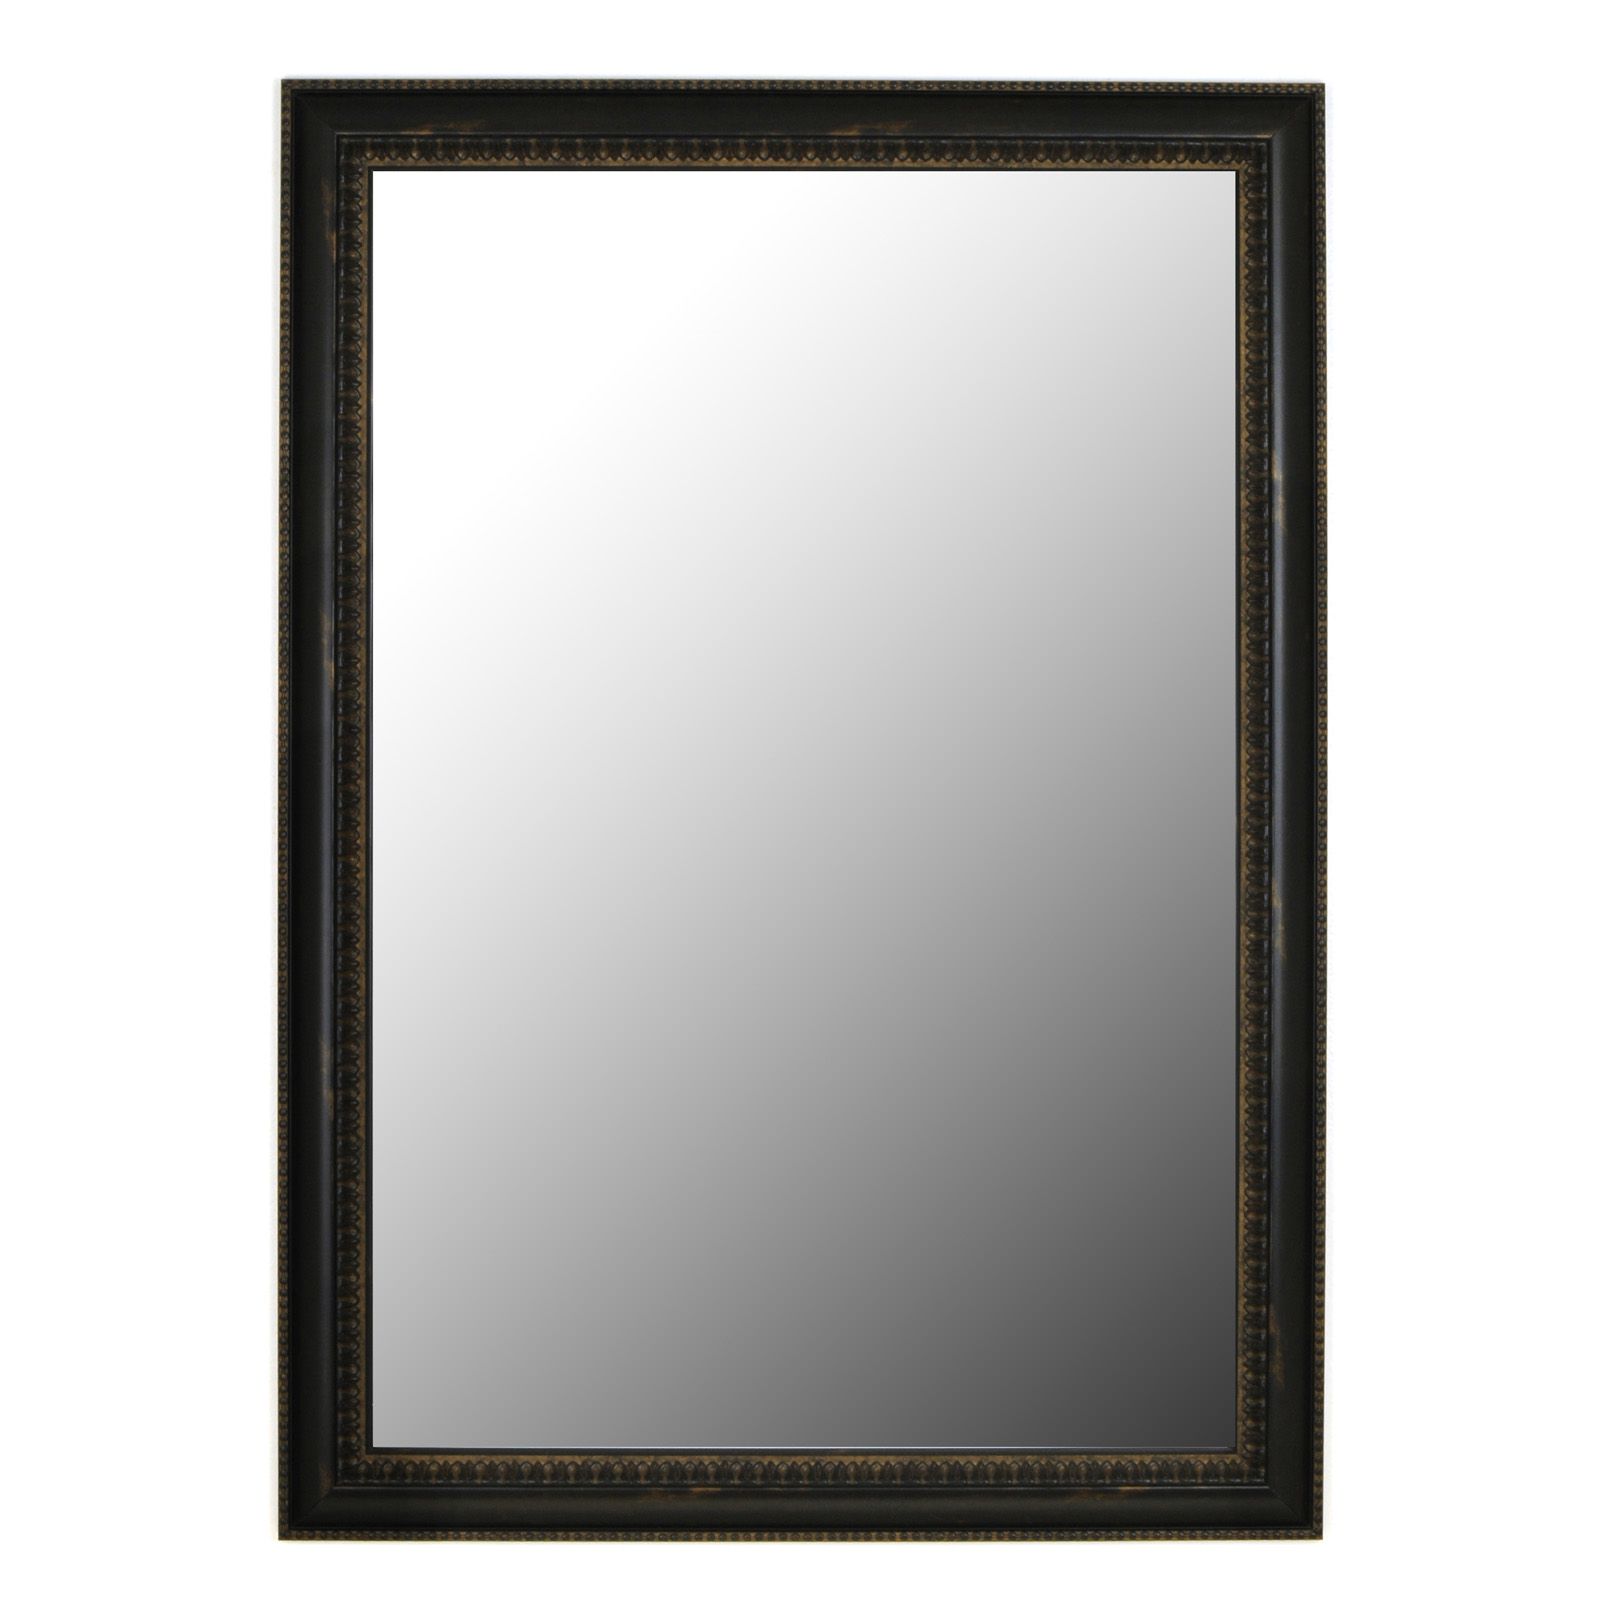 Second Look Mirrors Beaded Copper Black Petite Wall Mirror – Mirrors At Pertaining To Black Beaded Rectangular Wall Mirrors (View 7 of 15)